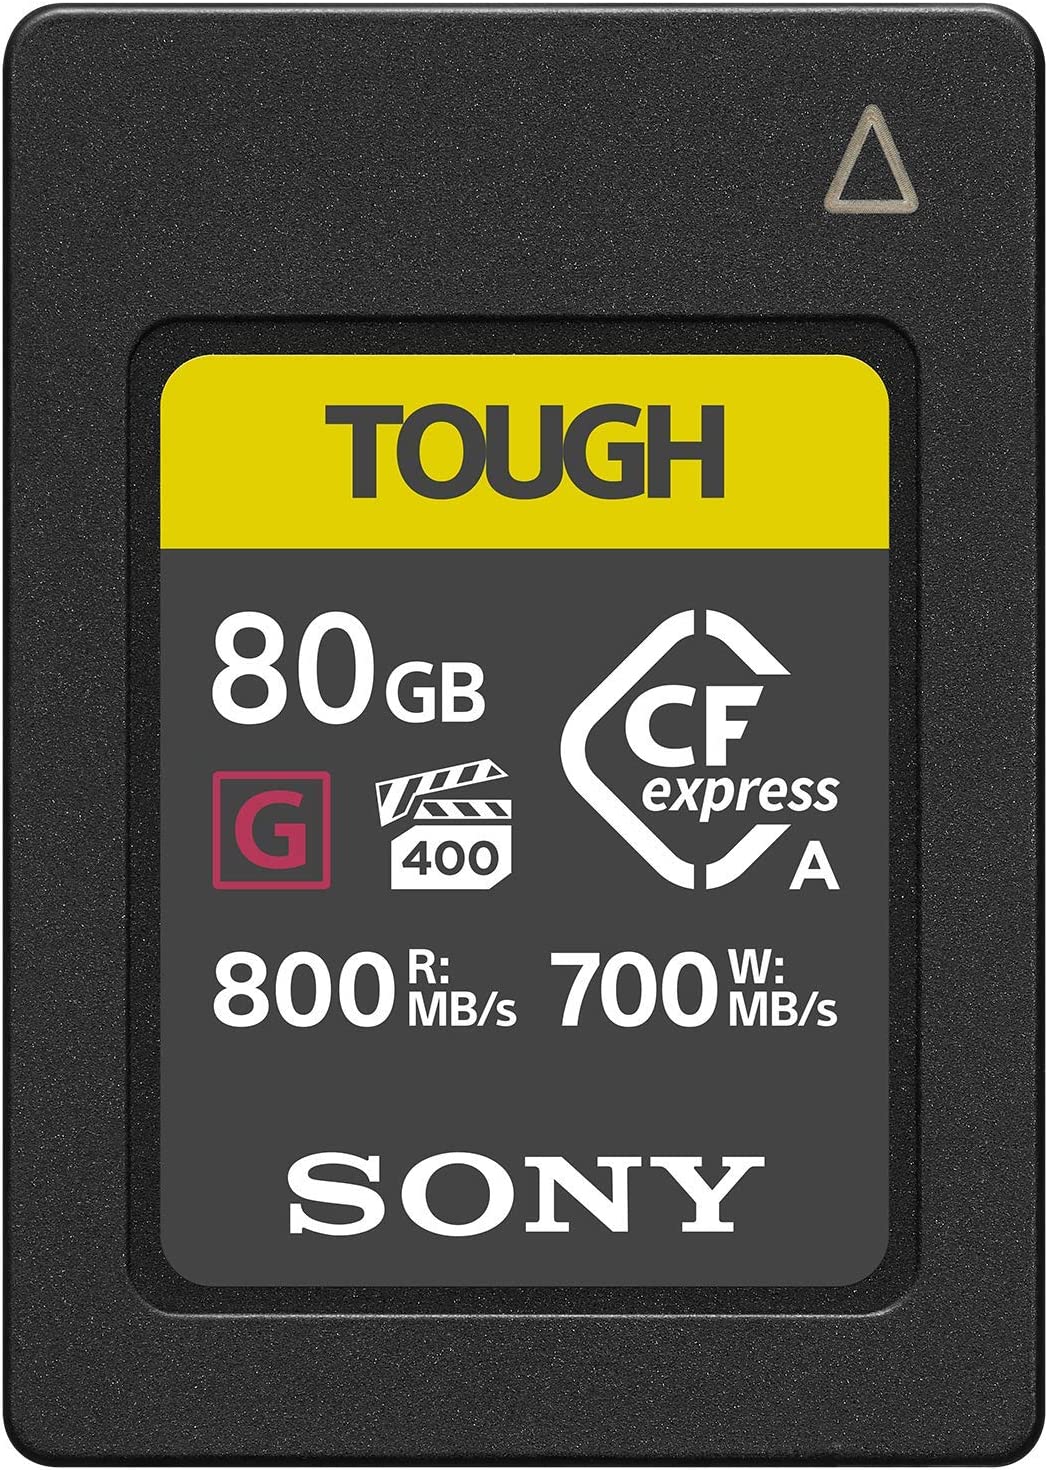 Sony 80GB CFexpress Type A (800MB/s) Memory Card - Product Photo 1 - Tough memory card